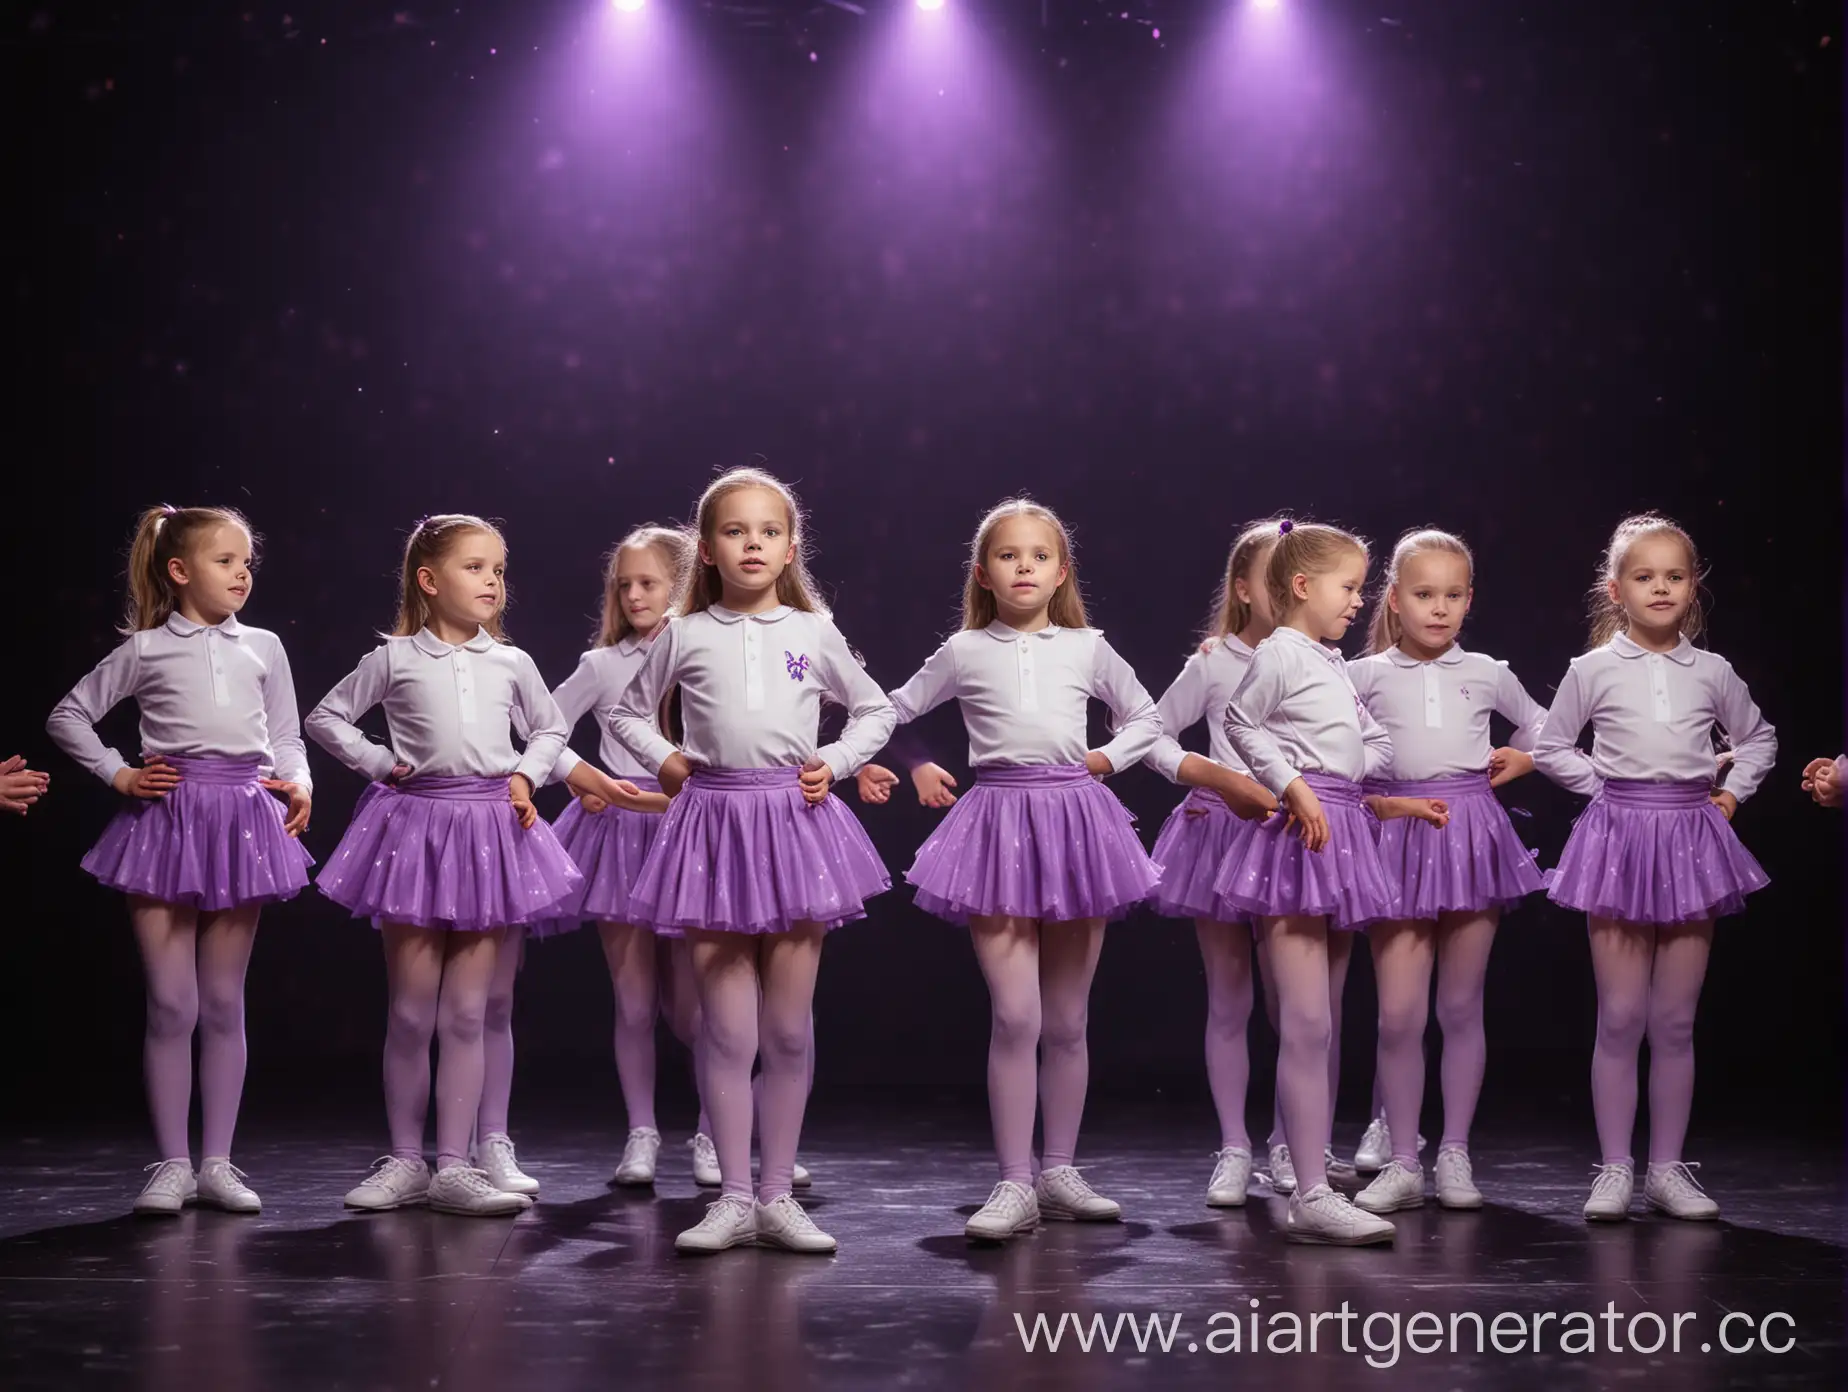 Synchronised-Dance-Performance-Eight-Girls-on-Stage-in-Purple-Skirts